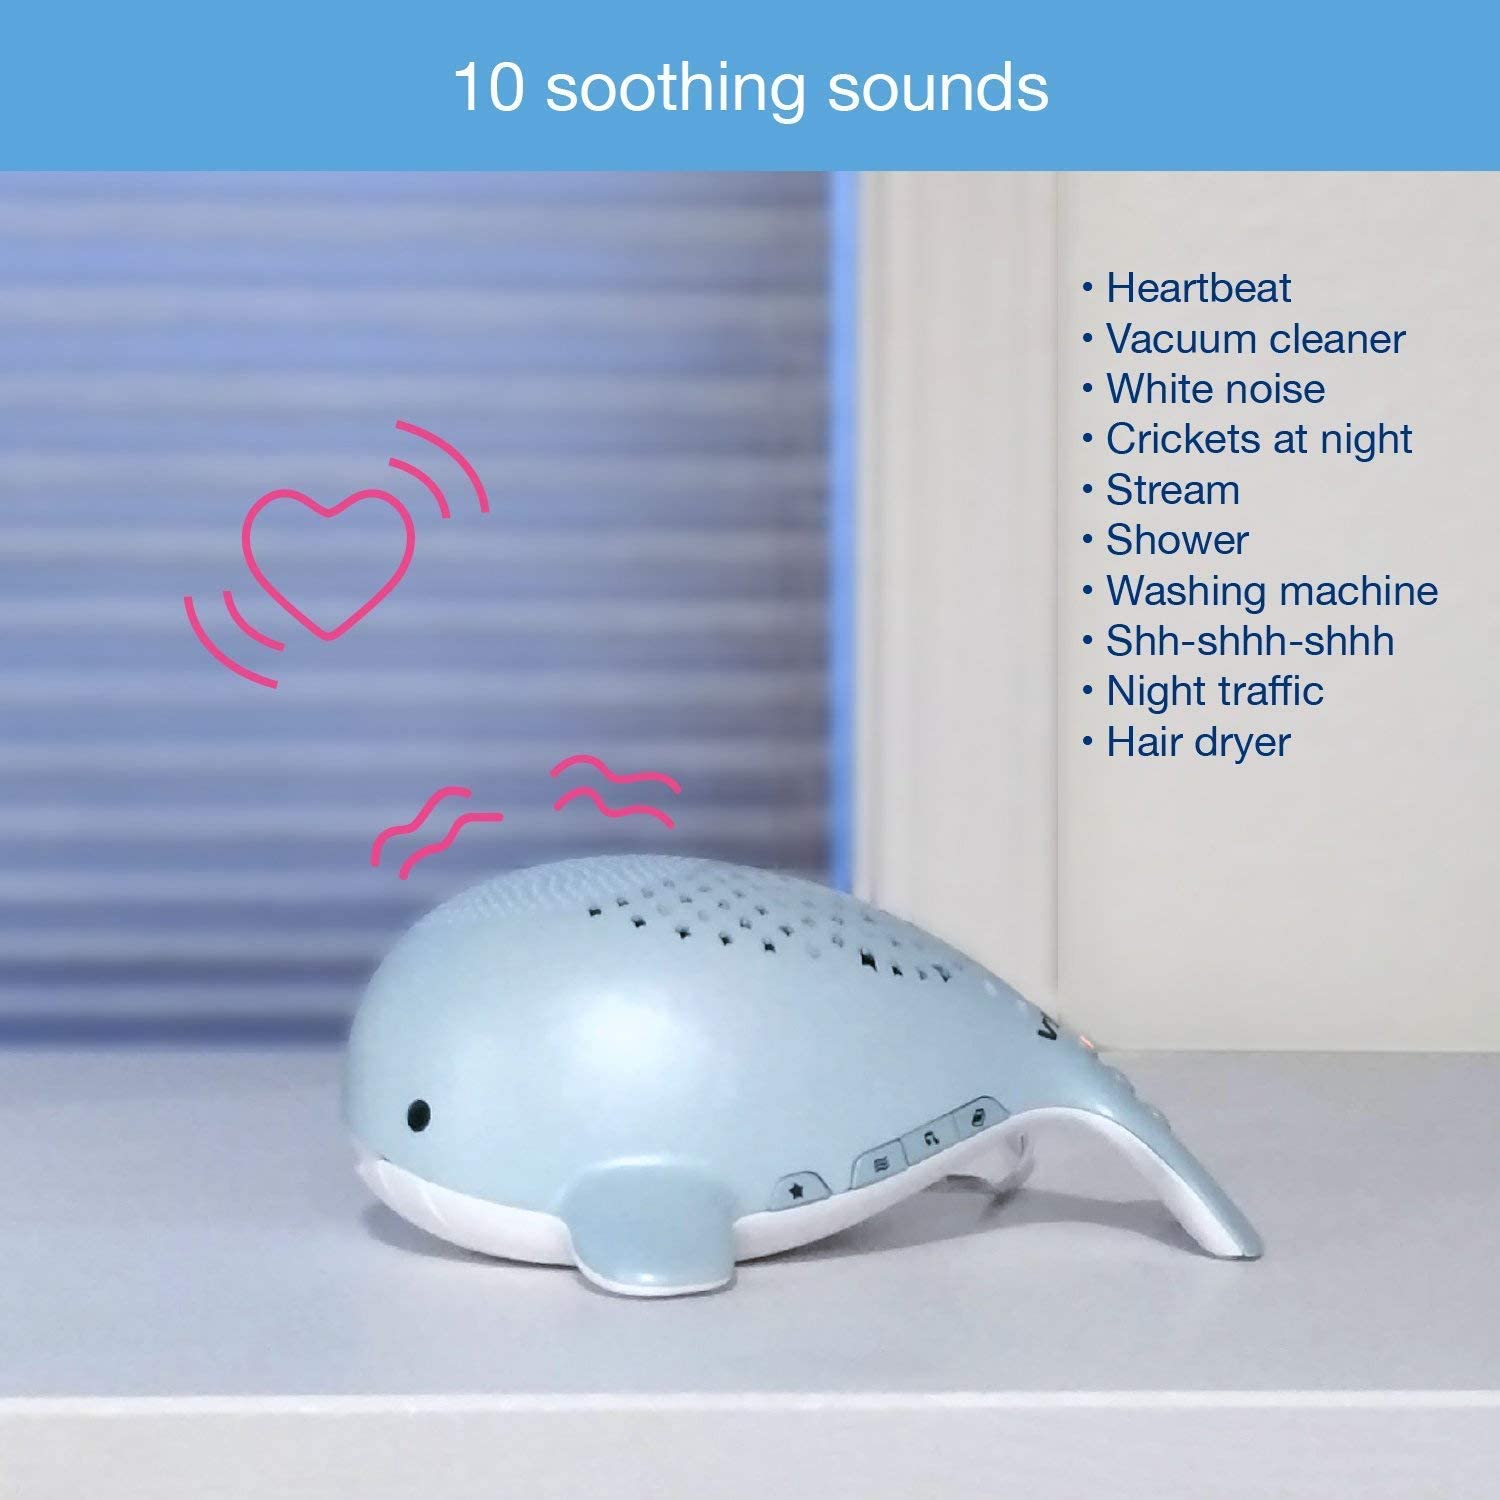 Vtech St5100 Safe & Sound Storytelling Soother 1 Soothing Sounds